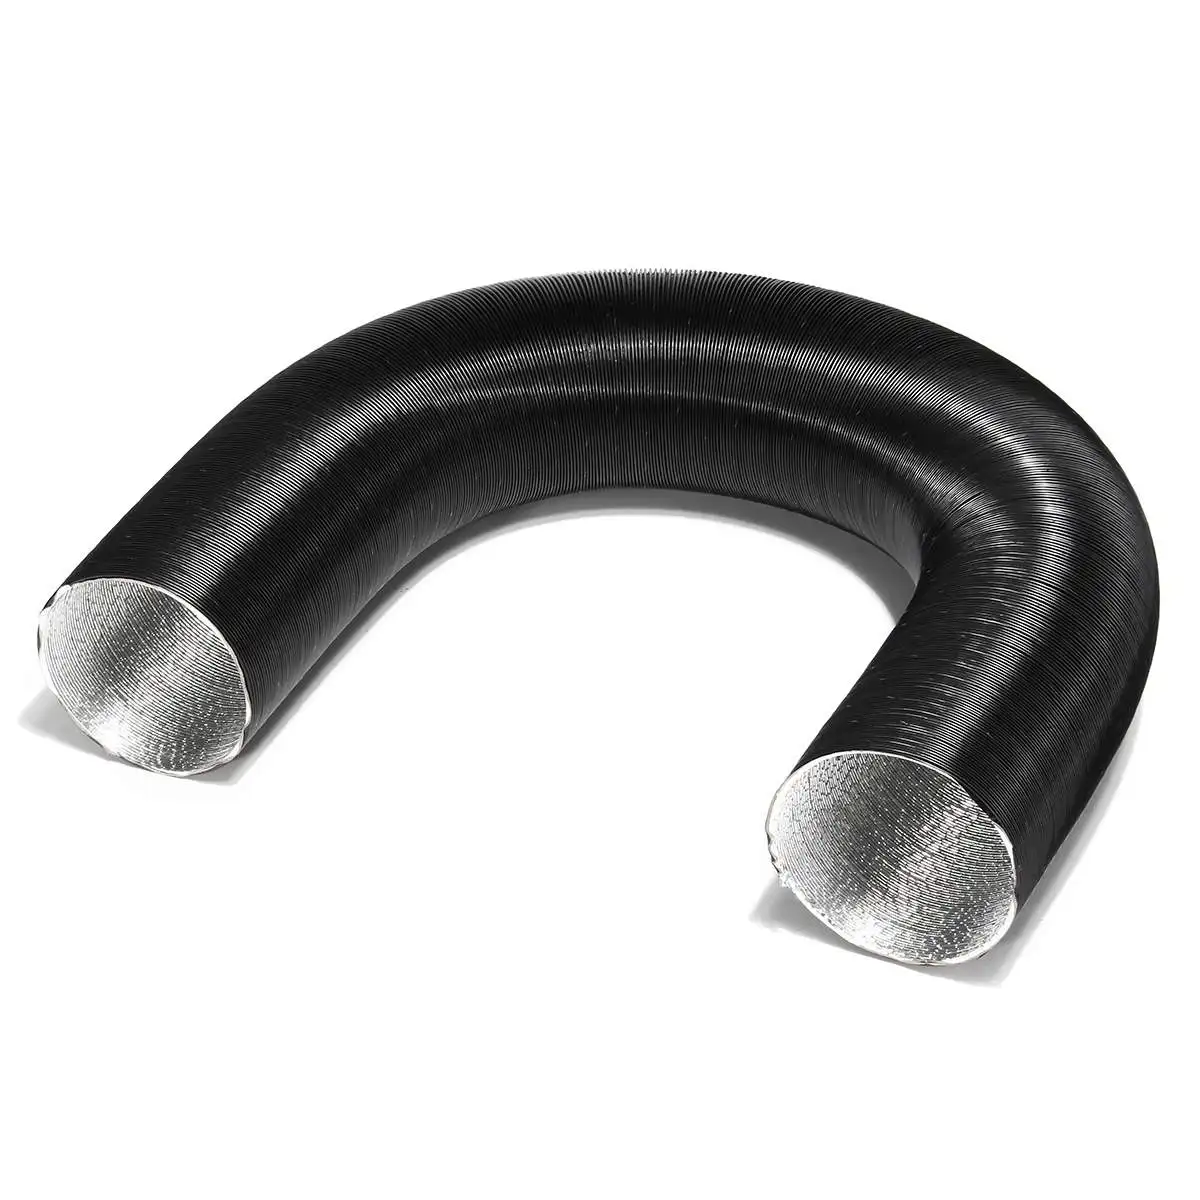 25/42/60/75/90mm Bellows Warm Air Ducting Intake Outlet Exhaust Corrugation Hose Pipe For Webasto Eberspacher Parking Heaters